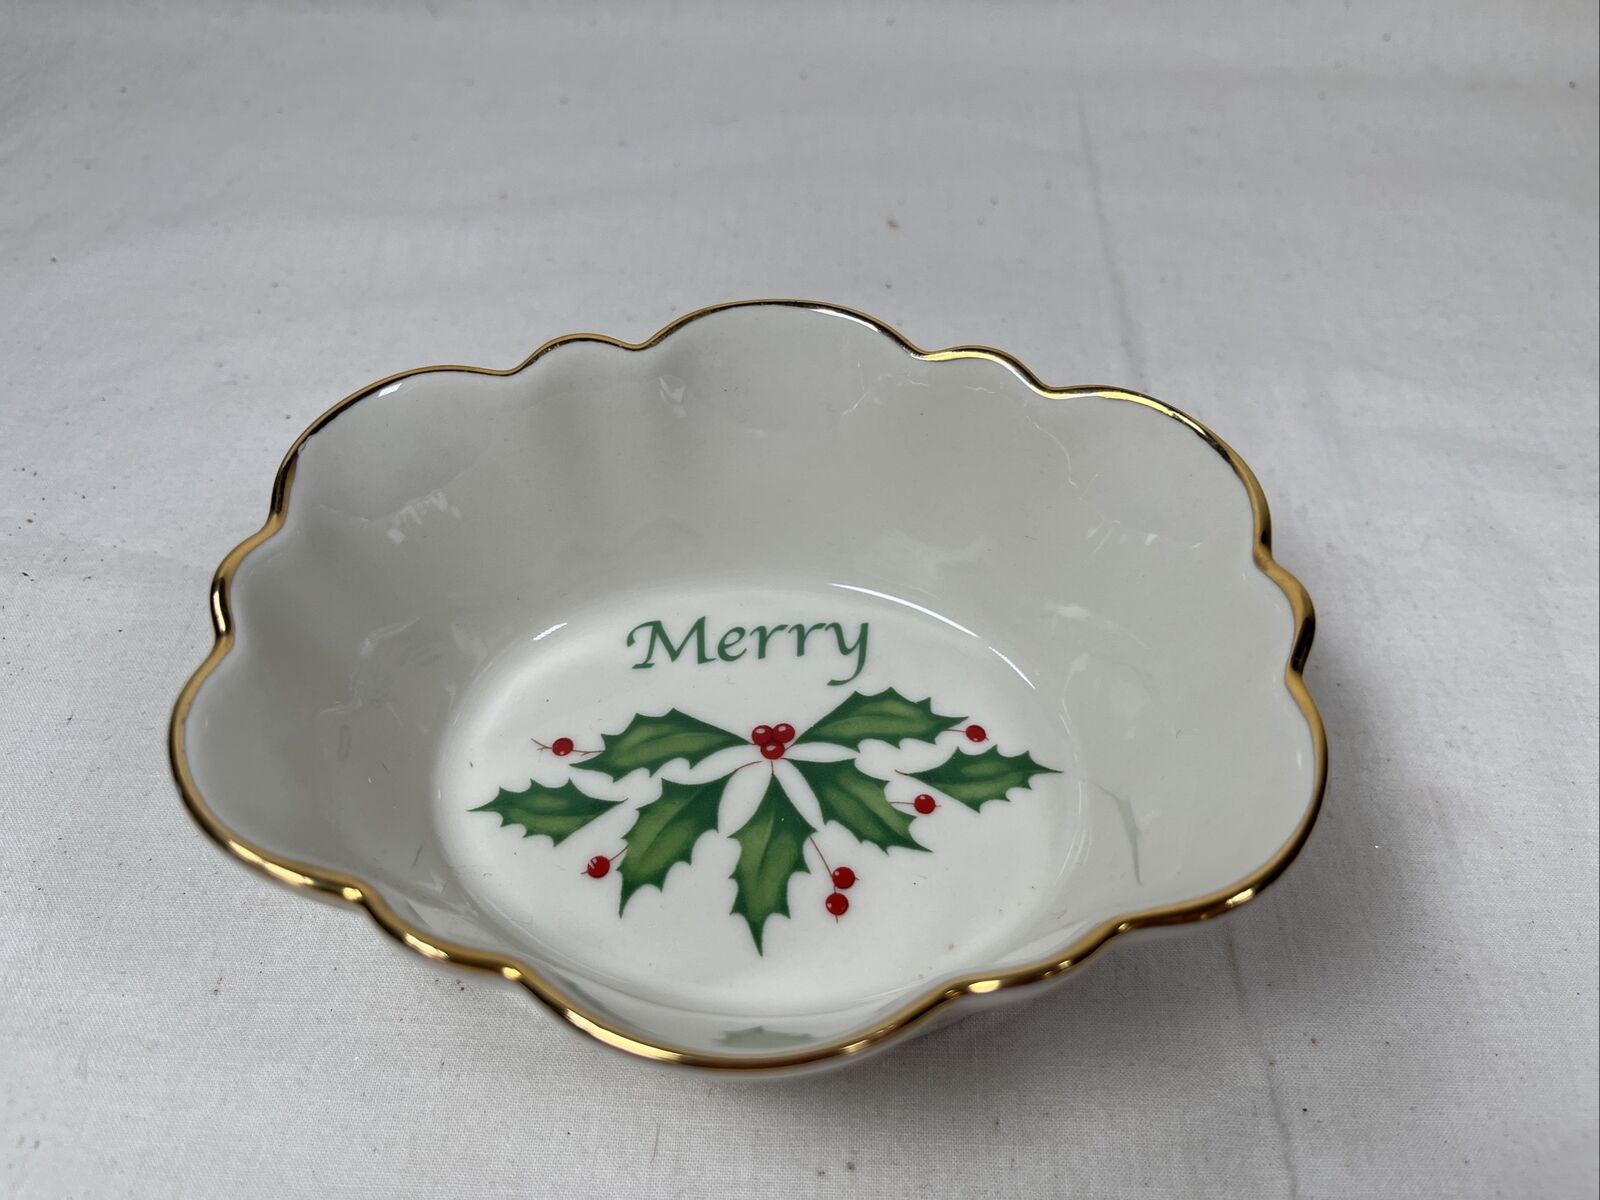 Lenox Holiday Series Oval Fluted Dish “Merry” Holly Cream Gold Trimmed 4.75\